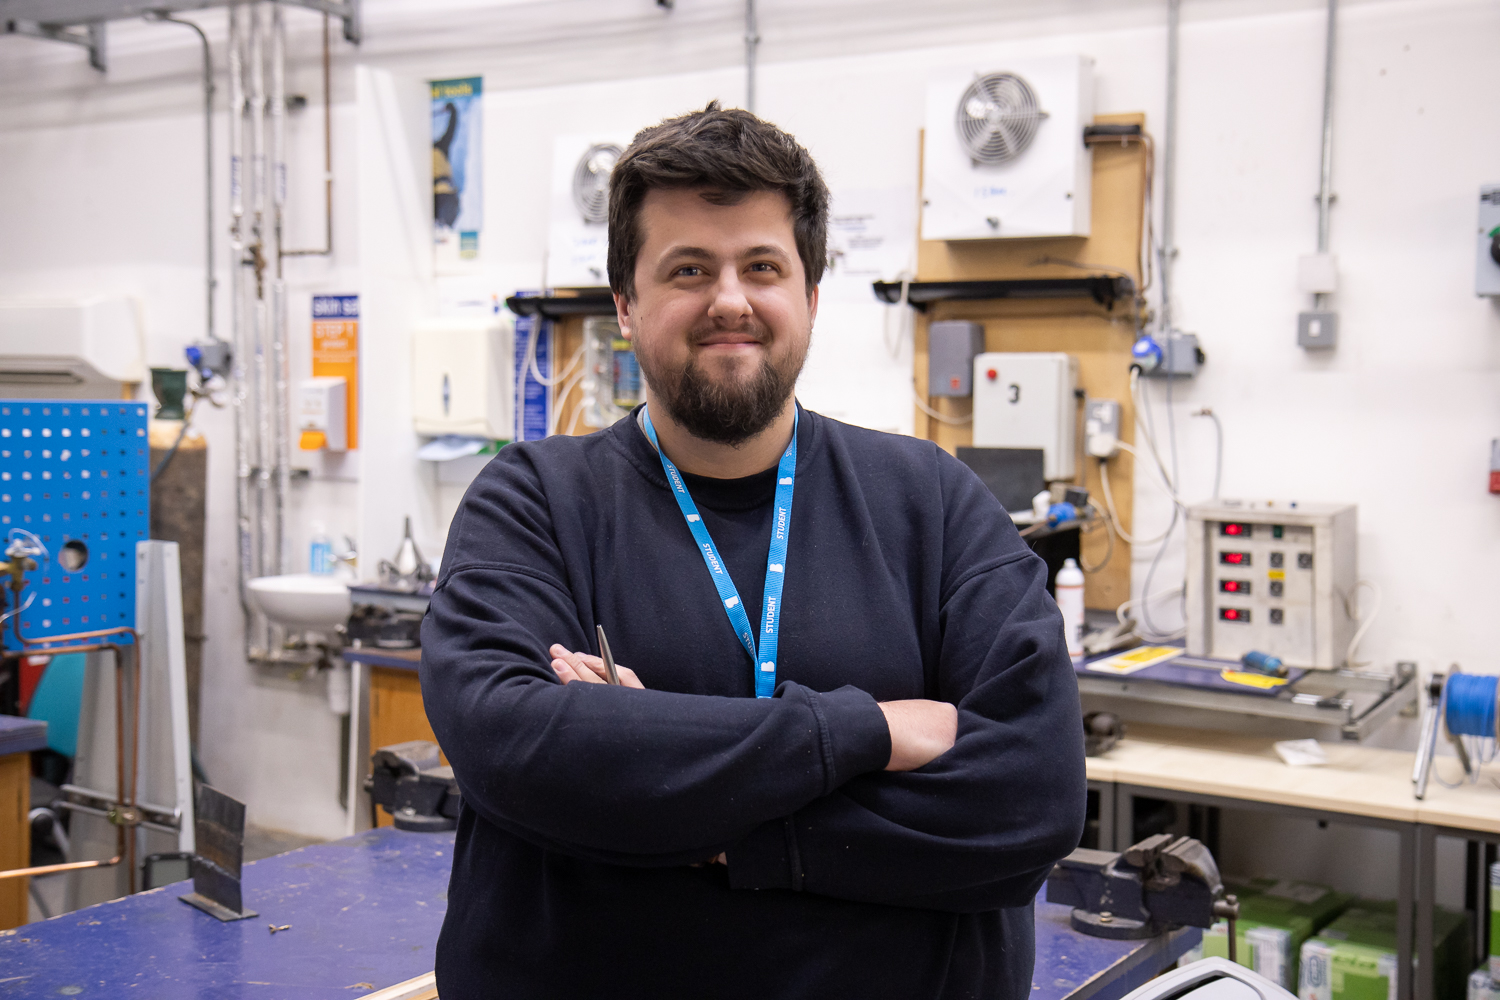 Meet James Bland: The experienced engineer furthering his development with a Bradford College apprenticeship